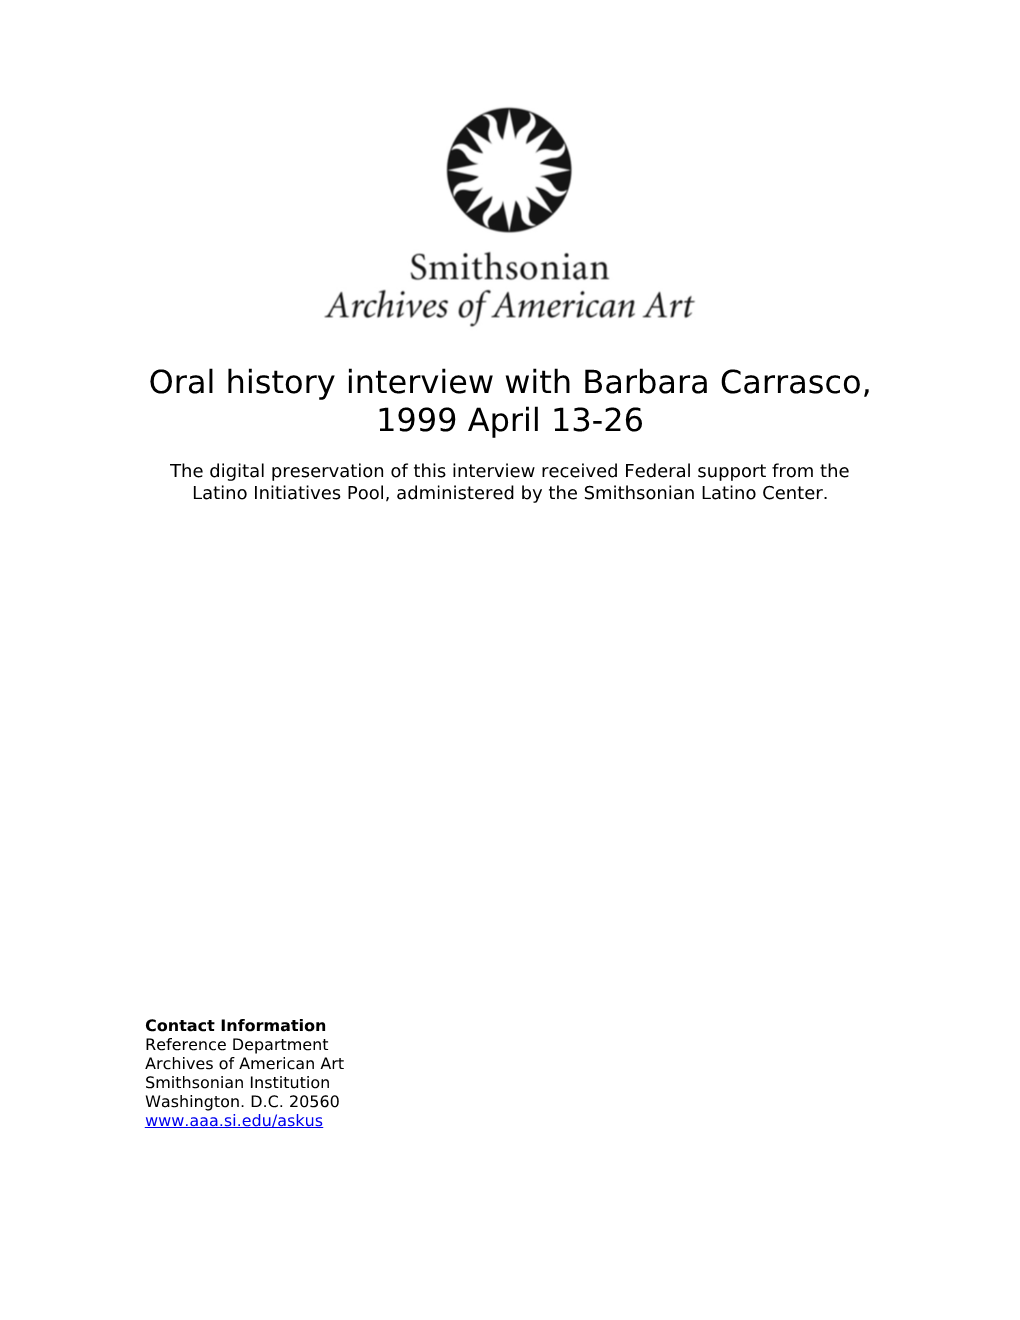 Oral History Interview with Barbara Carrasco, 1999 April 13-26